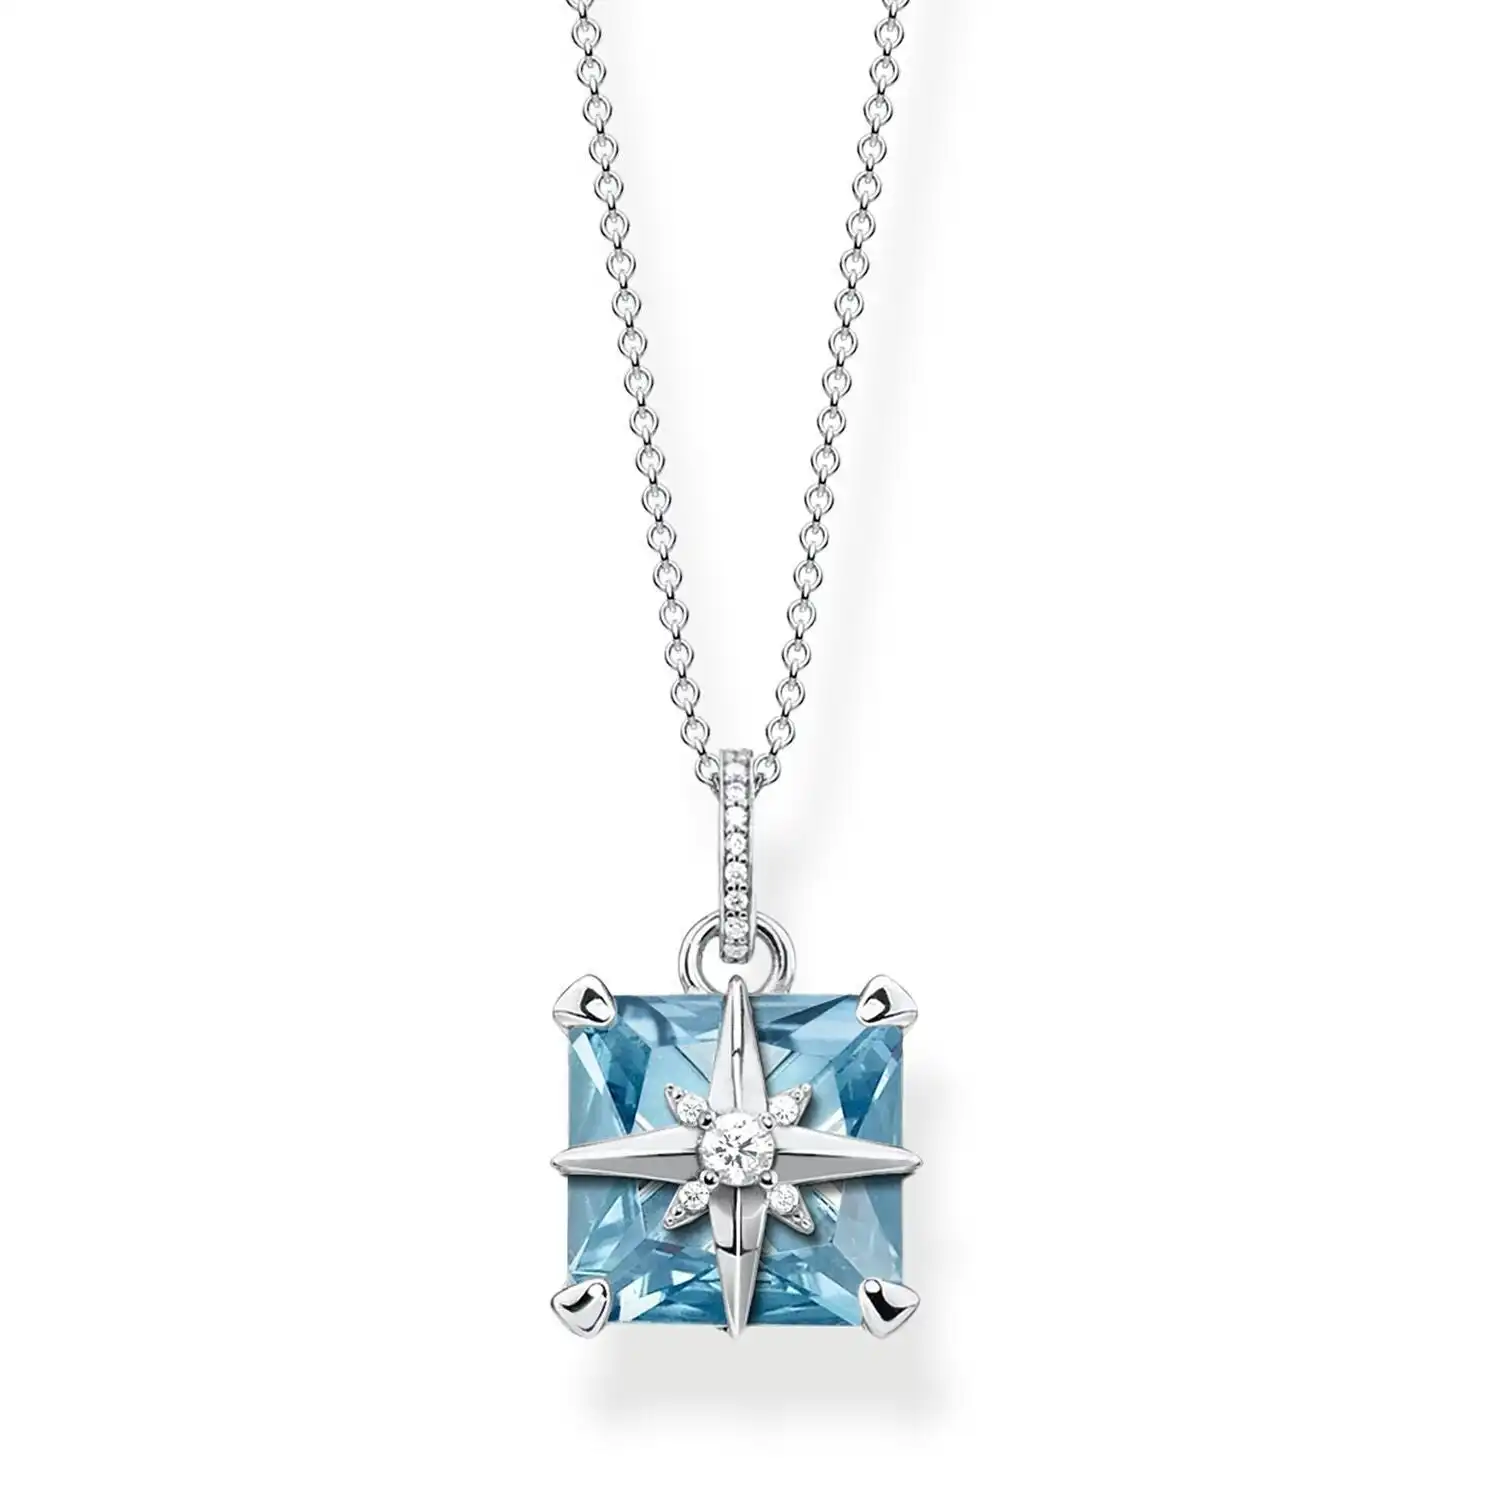 Thomas Sabo Necklace Blue Stone With Star